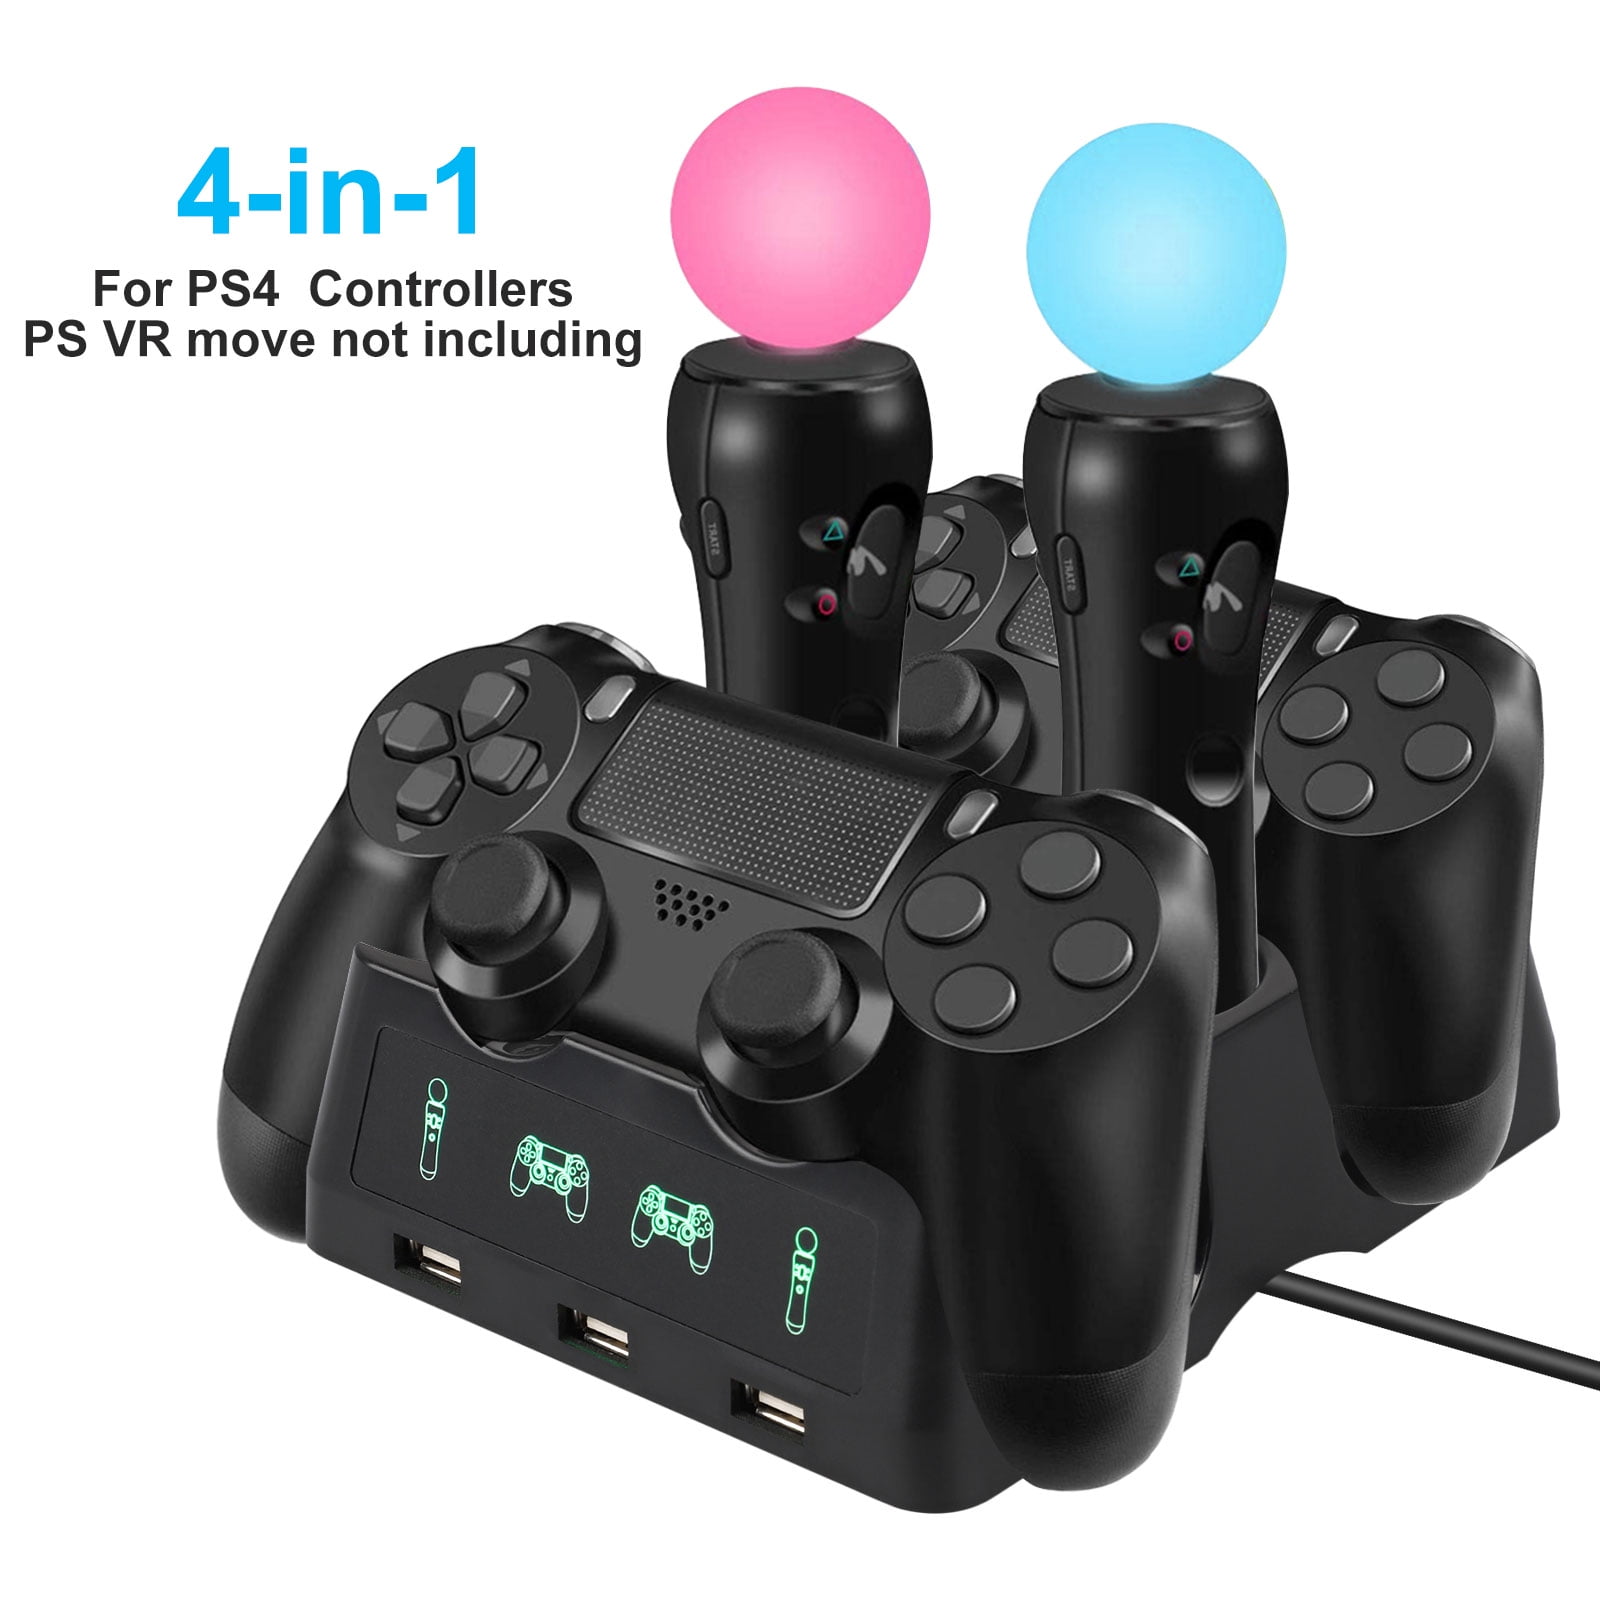 Controller Charging Dock Station Stand for Playstation PS4/MOVE/PS4 VR Move, EEEkit Quad Charger for Move Controller and Move, Black - Walmart.com